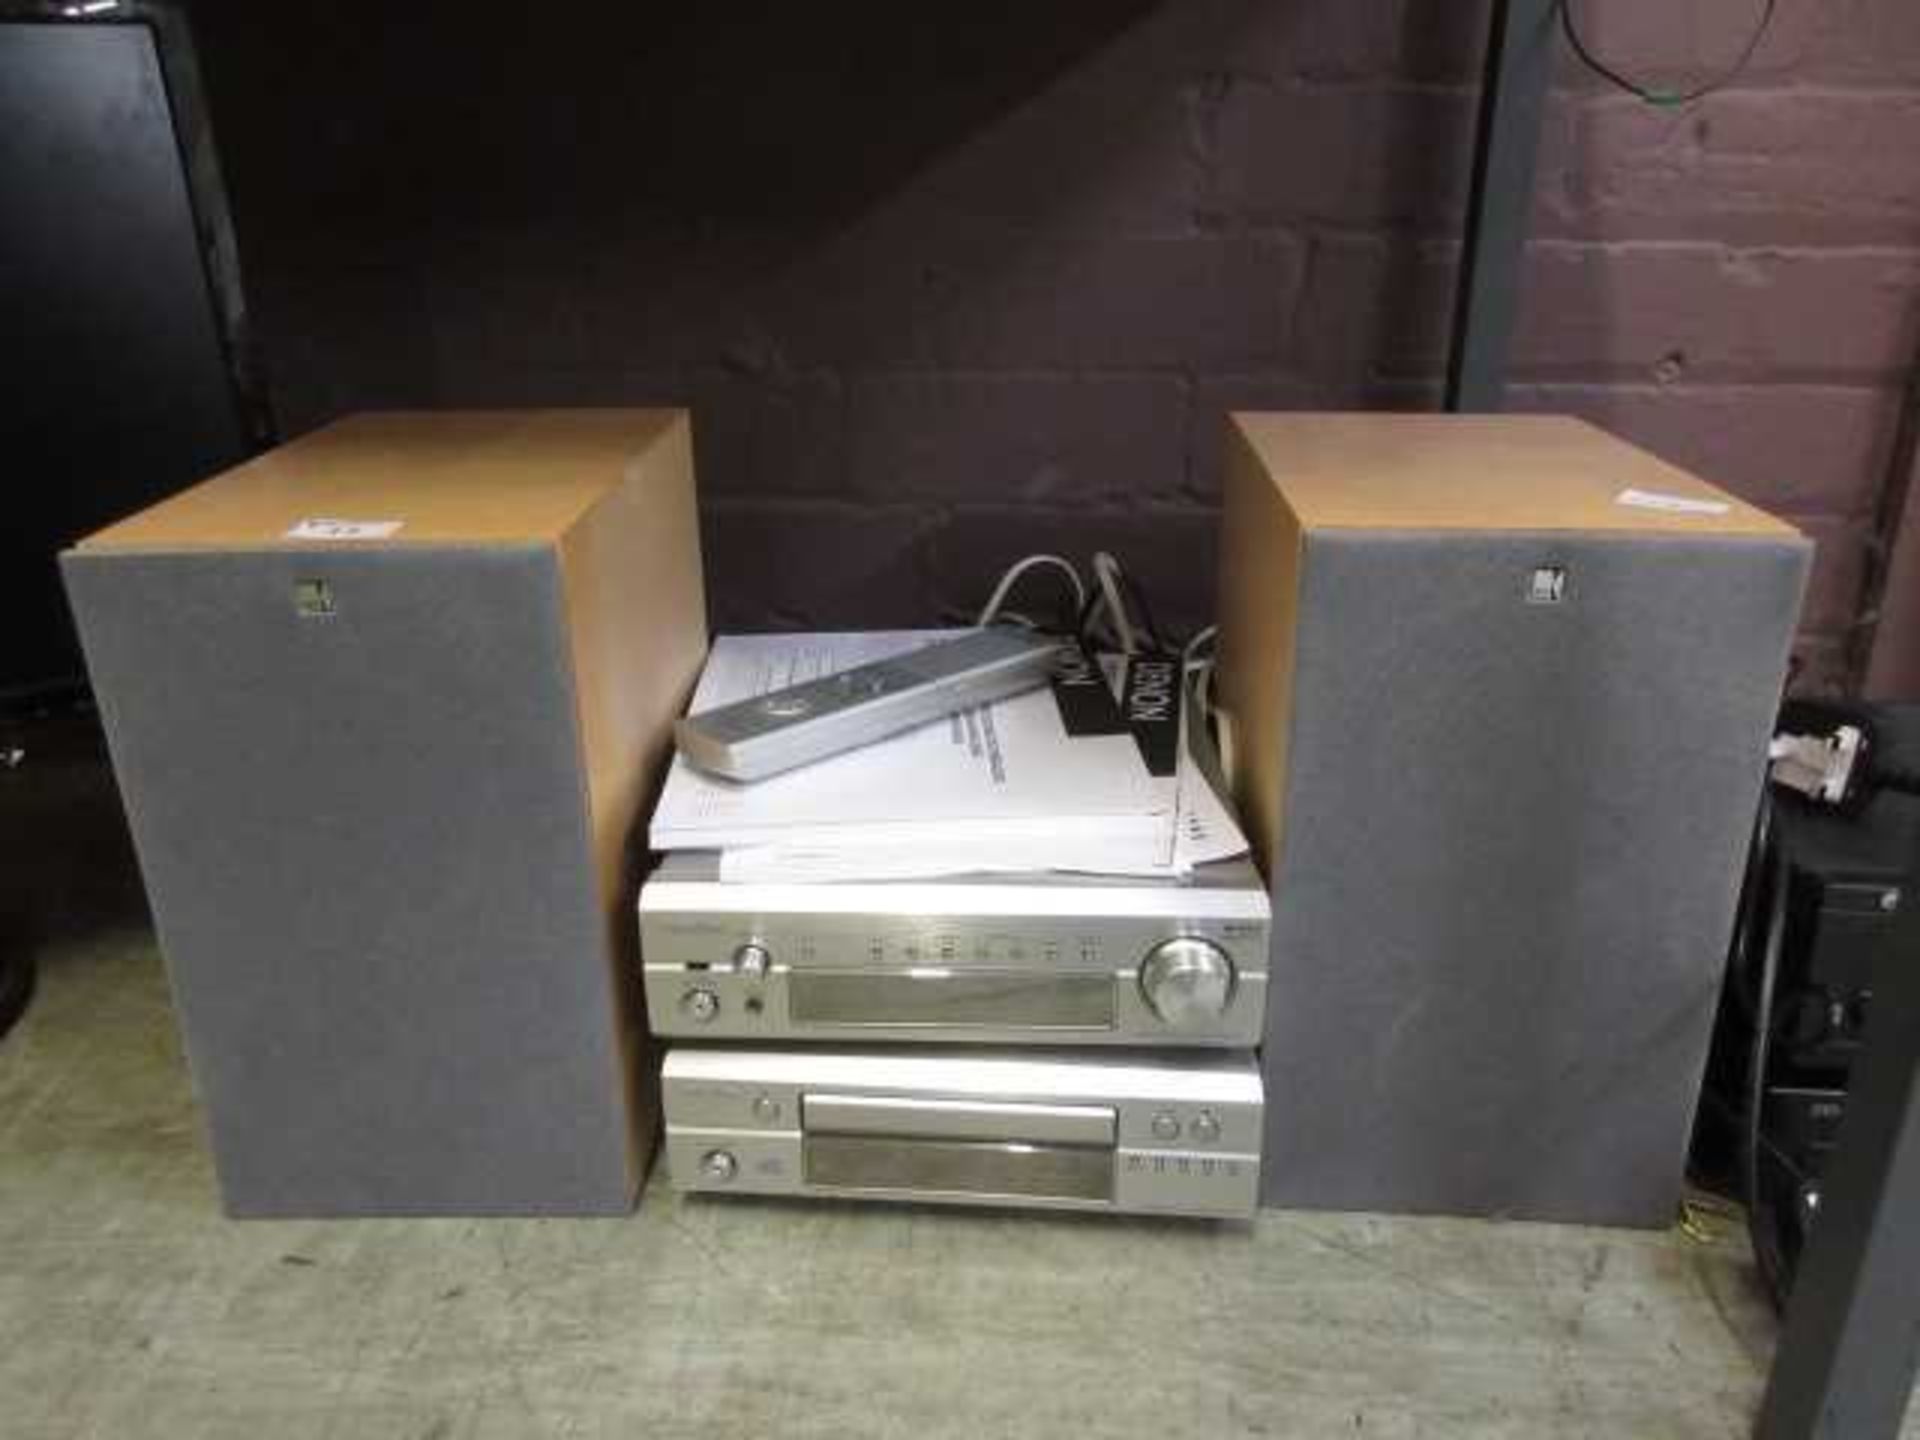 A Denon stereo receiver and CD player along with two KEF speakers